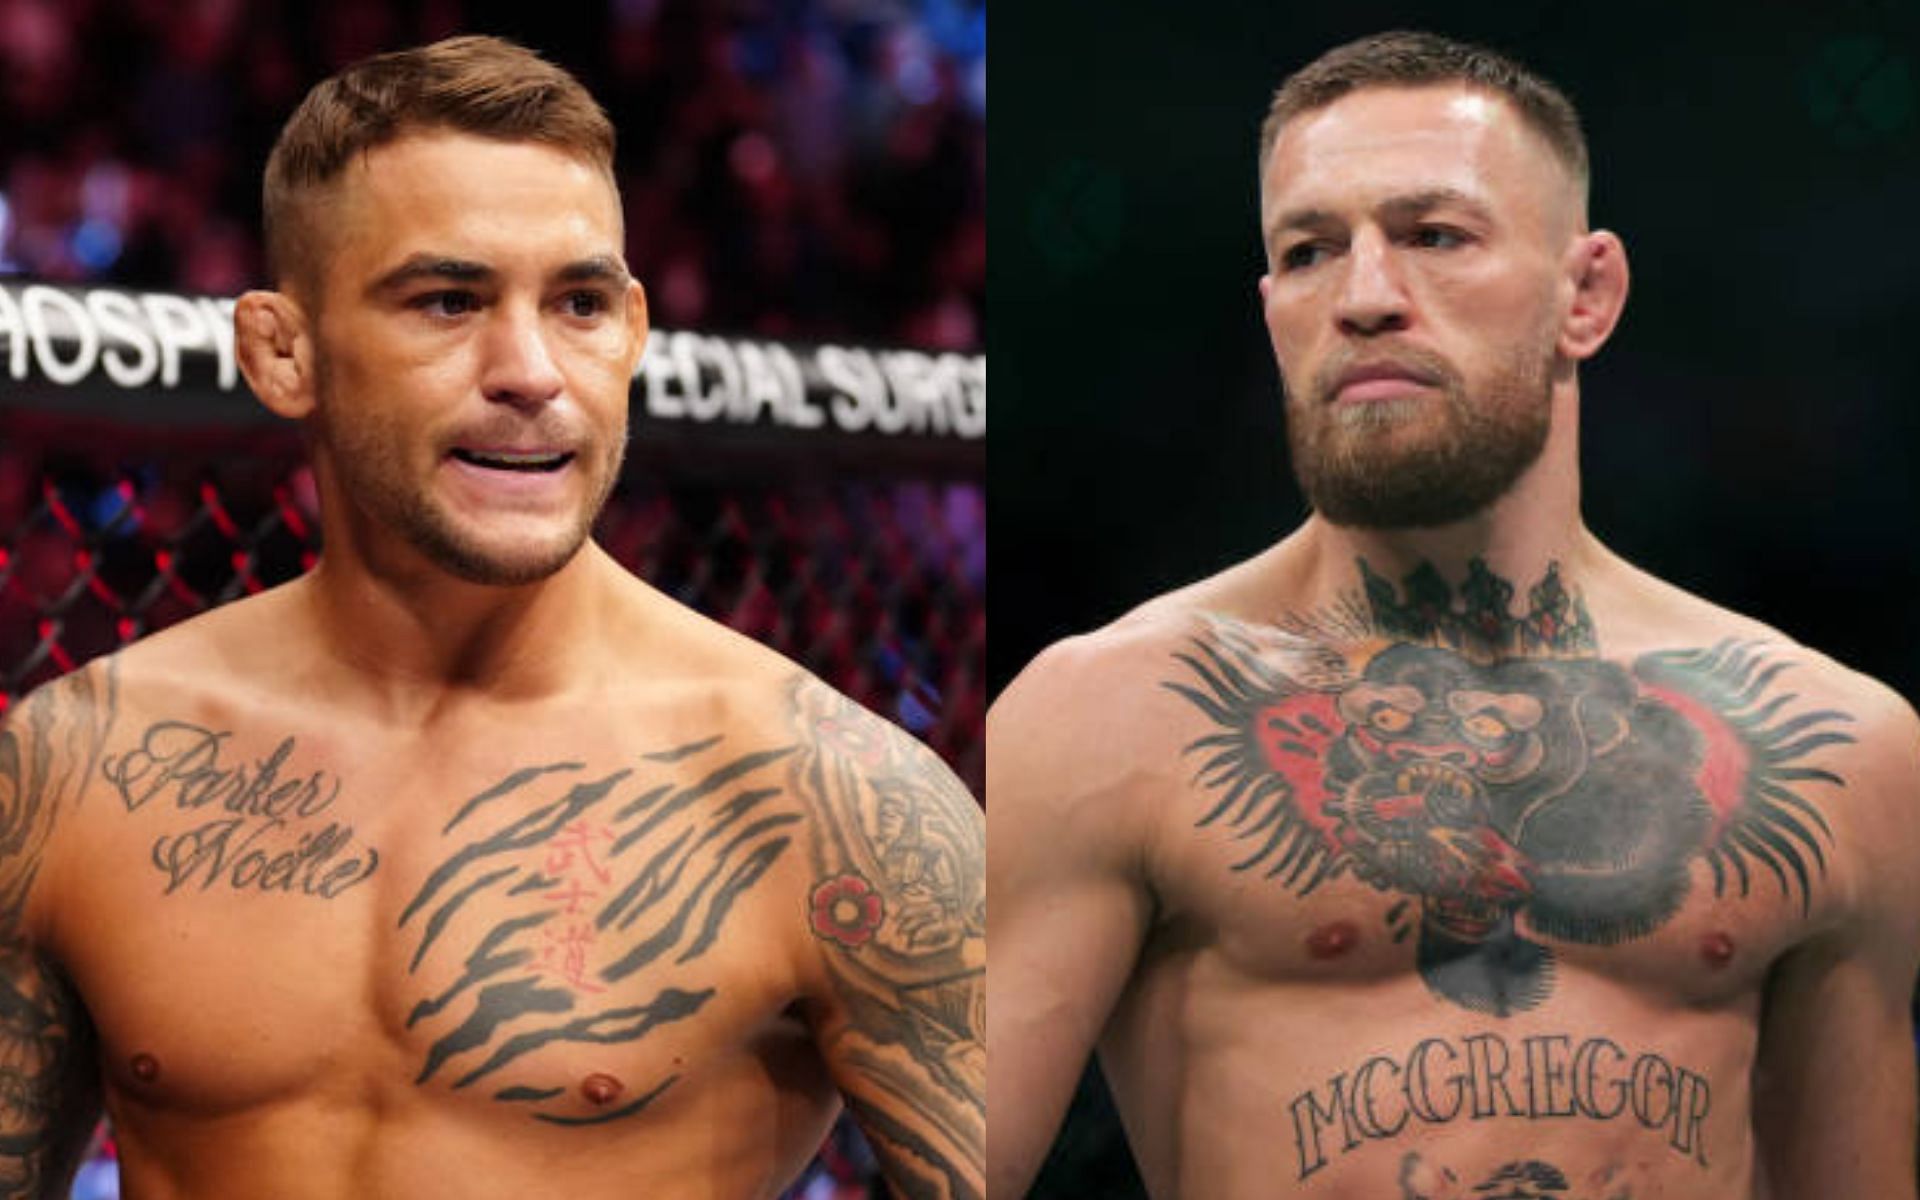 Dustin Poirier (left) and Conor McGregor (right) [Images Courtesy: @GettyImages]